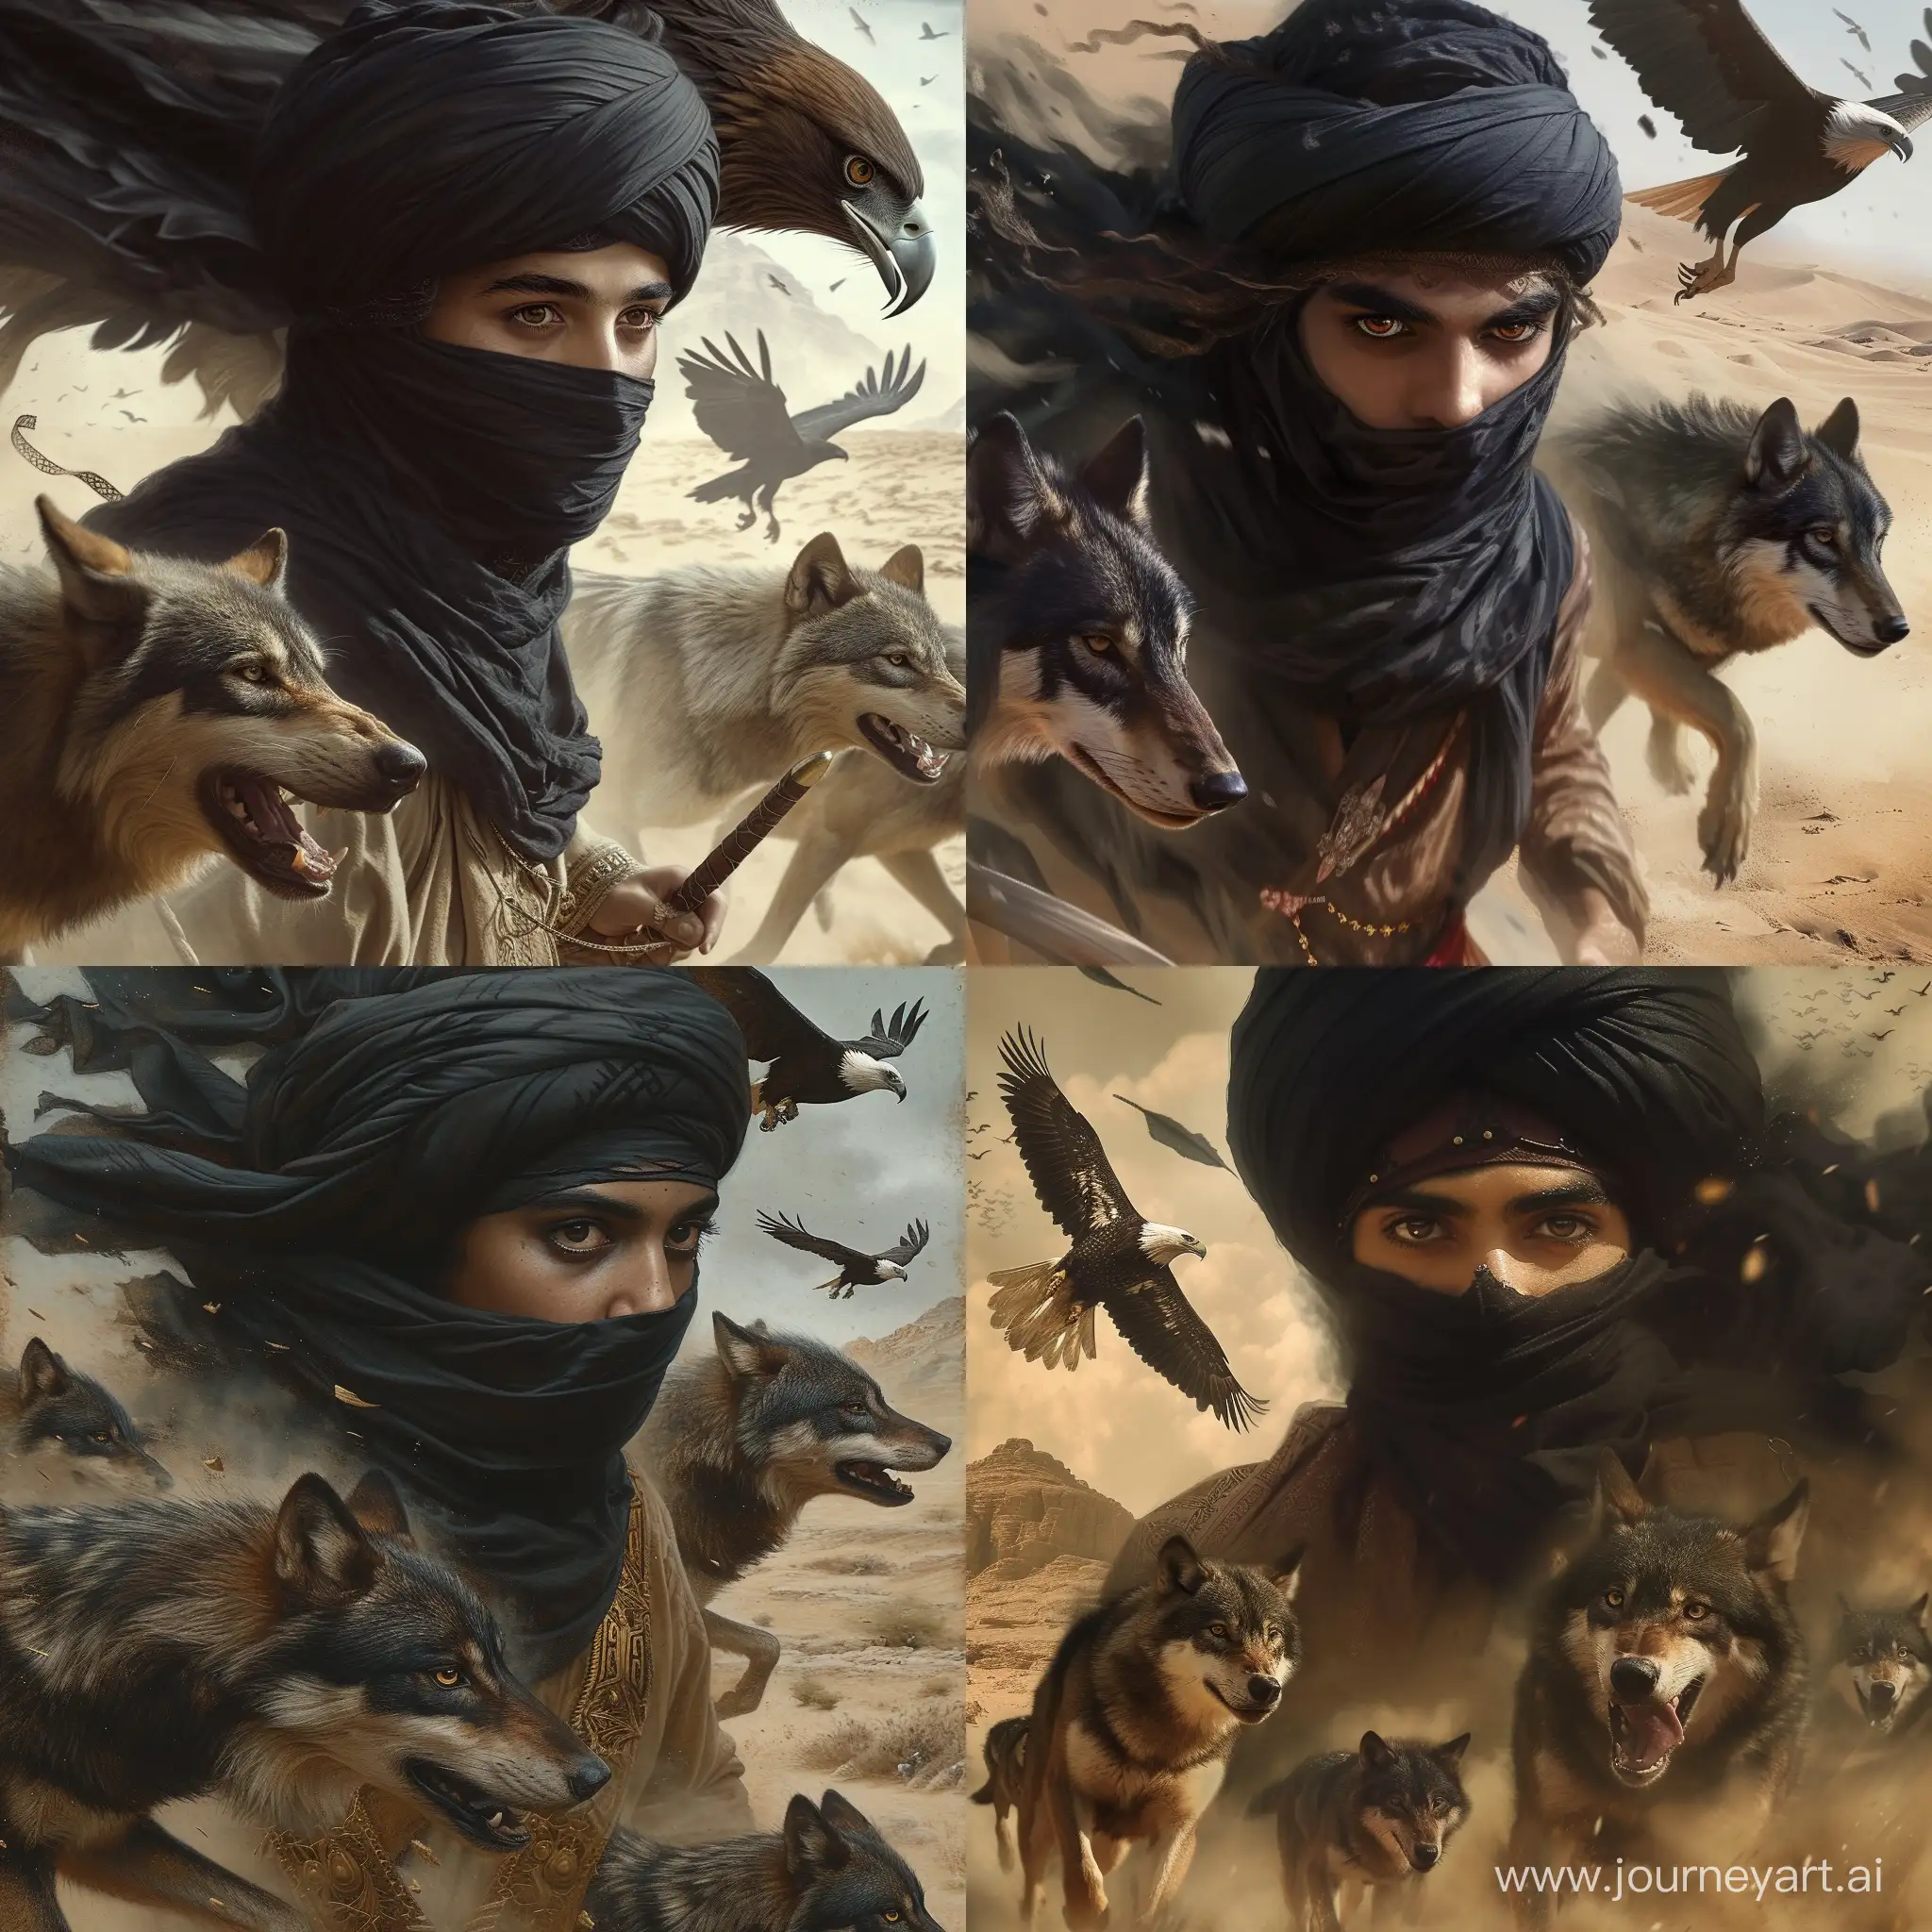 Young-Yemeni-Man-in-Traditional-Islamic-Attire-Heading-to-Mecca-with-Wolves-and-Eagle